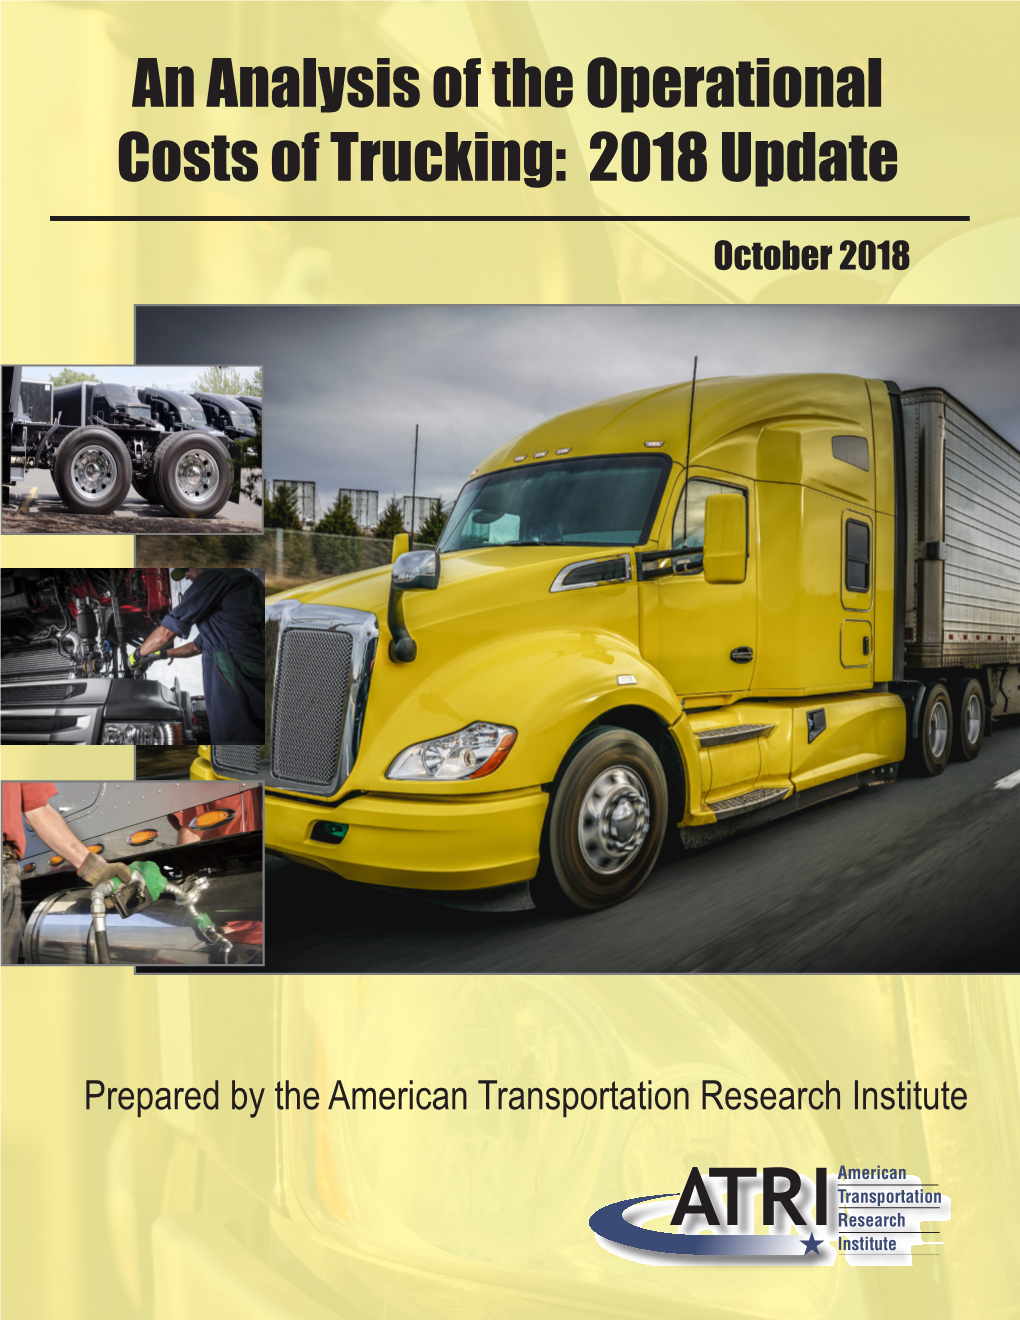 An Analysis of the Operational Costs of Trucking: 2018 Update